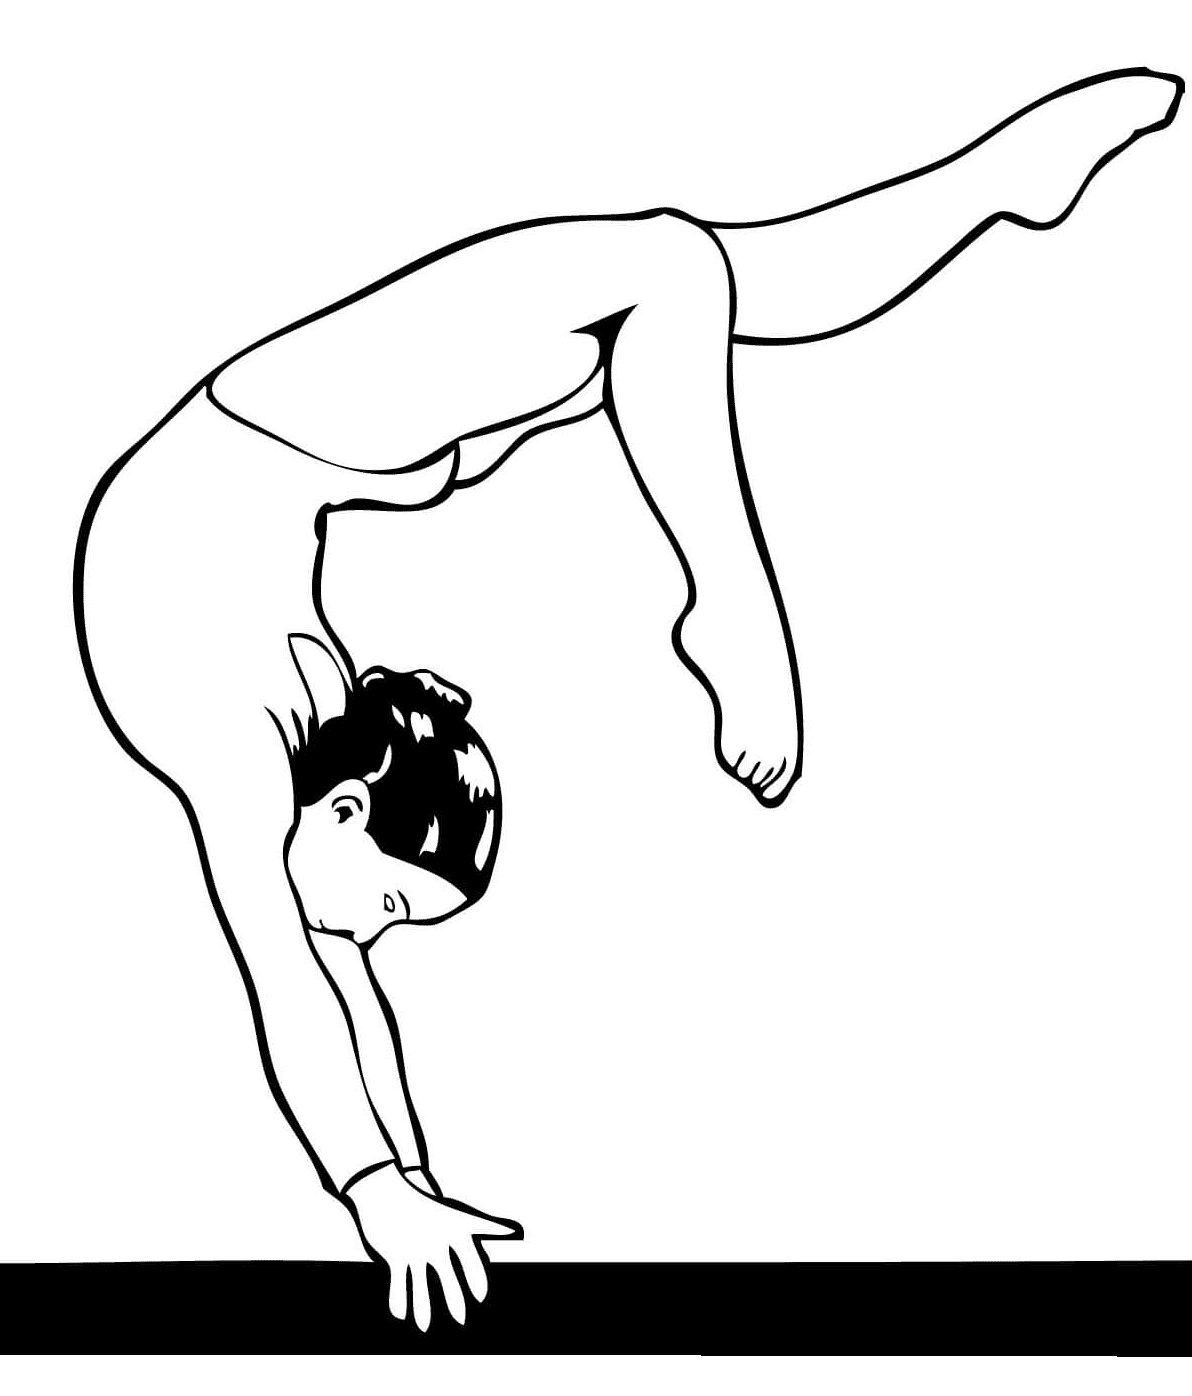 Full Turn on Balance Beam Coloring Pages